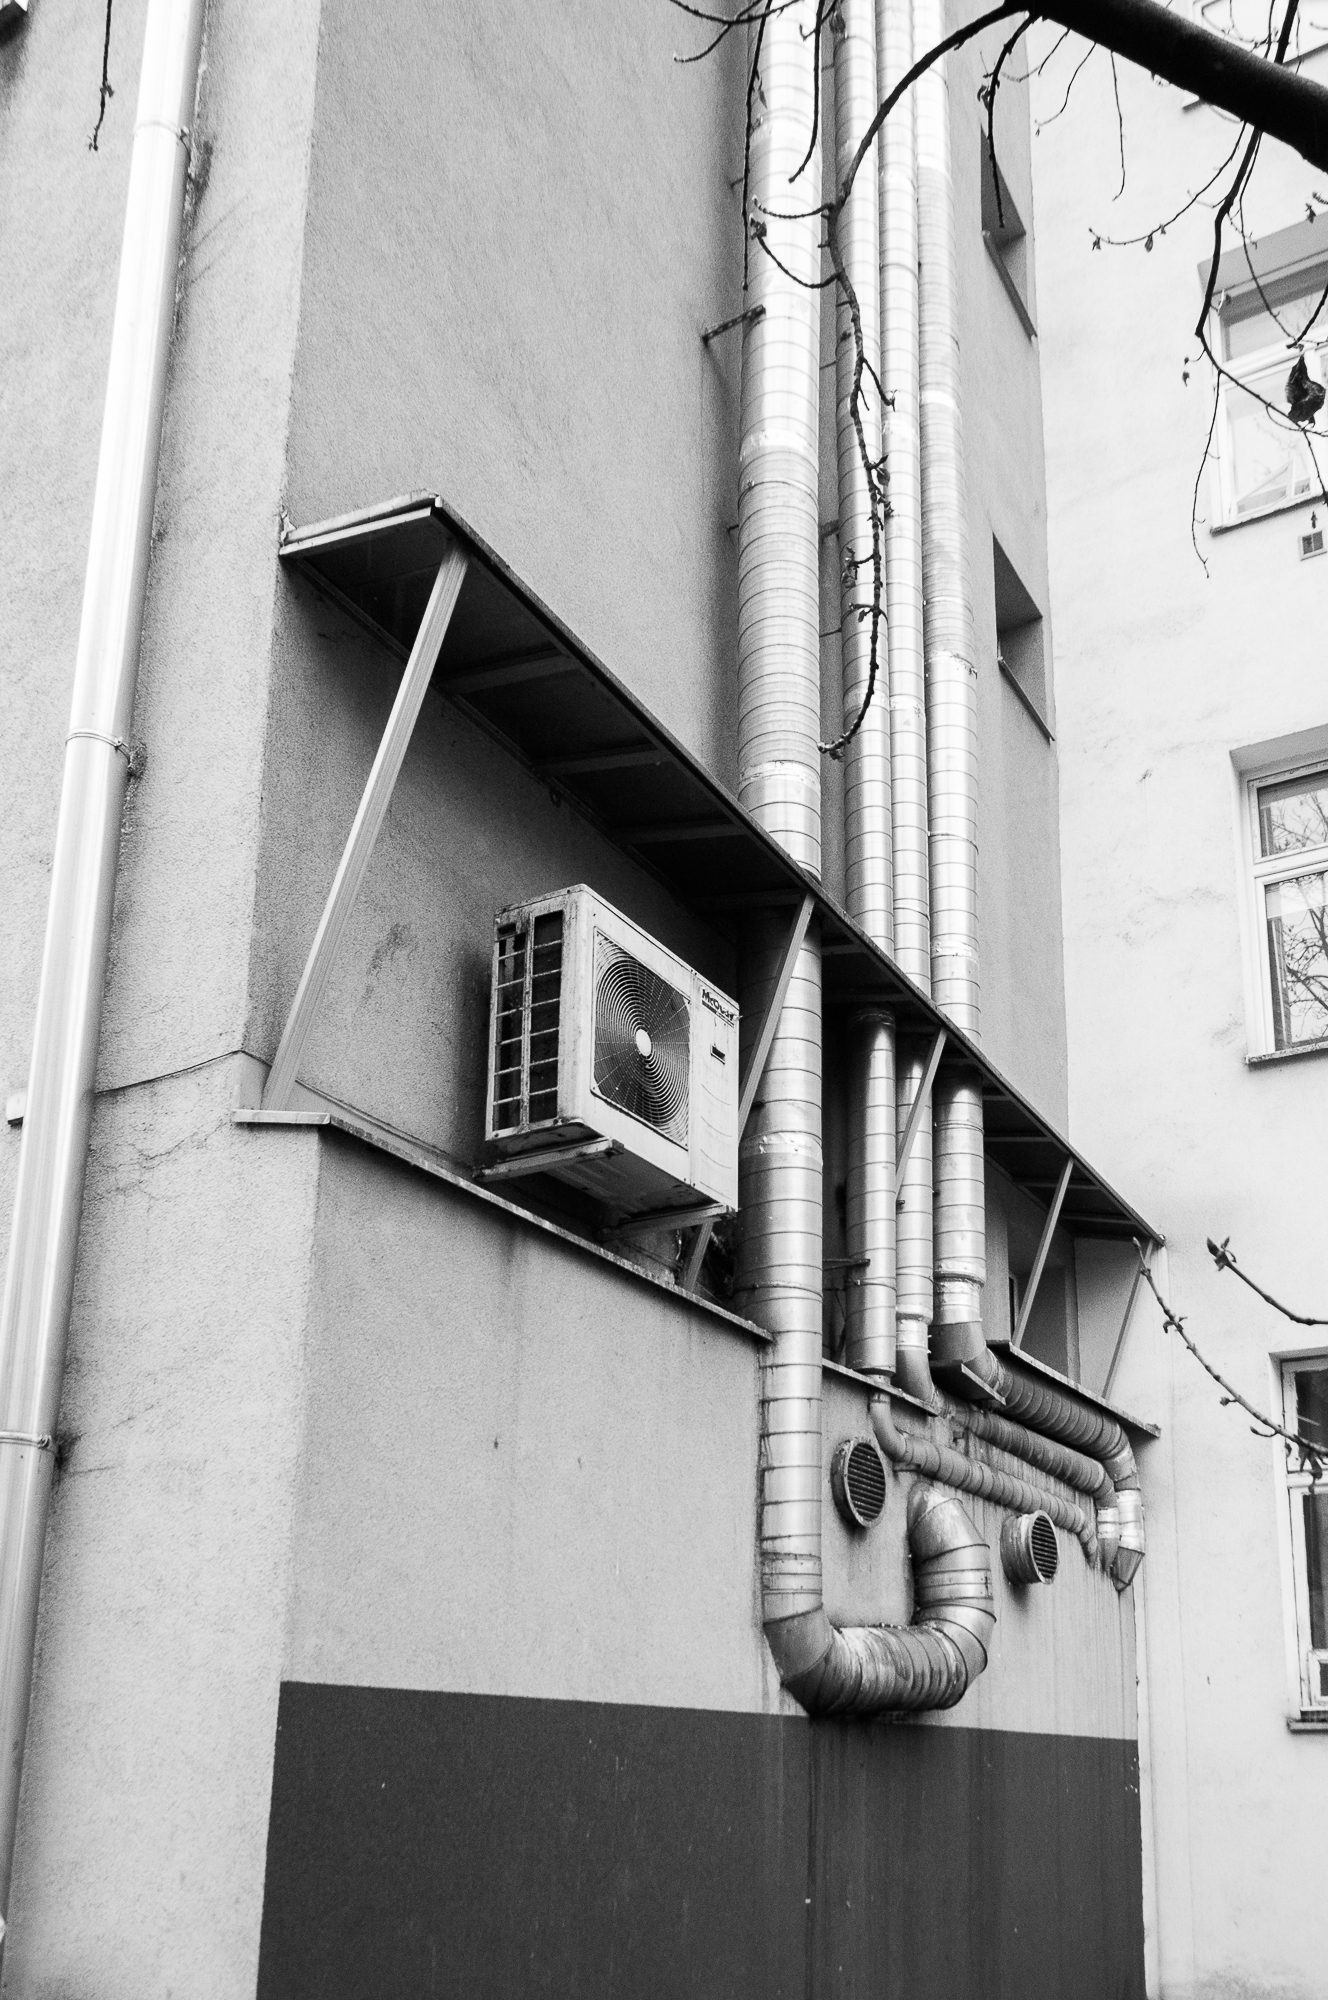 Adam Mazek Photography 2022. Warsaw Street Photography. Post: "Nowhere to go." Big Brother. Abstraction.